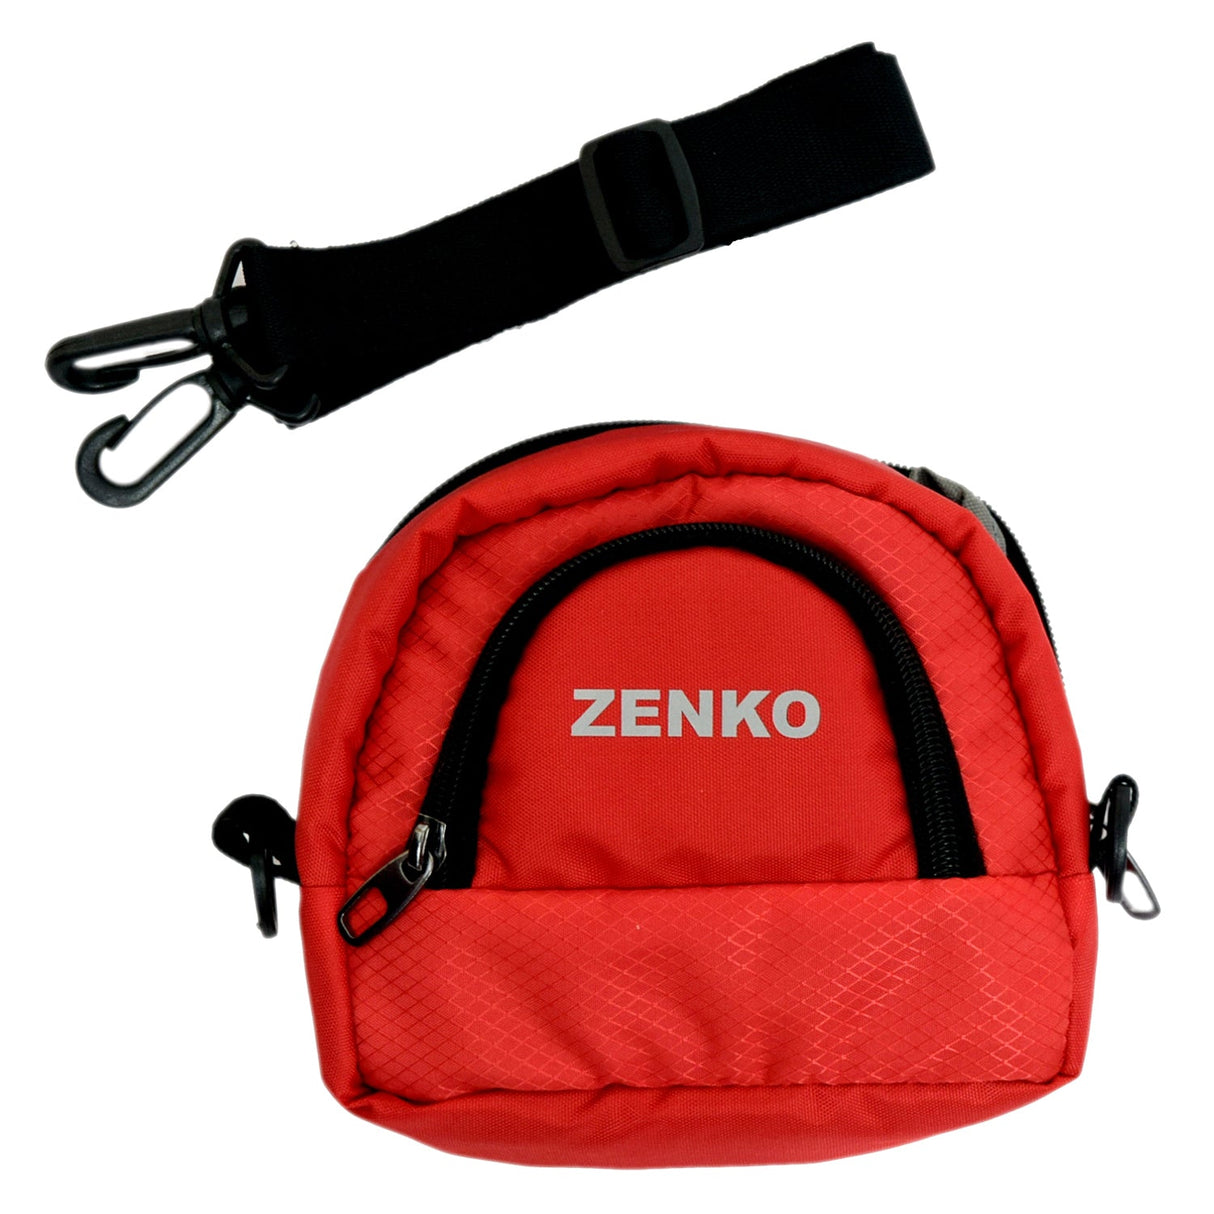 Zenko pouch for SQ1 instant camera bag Red